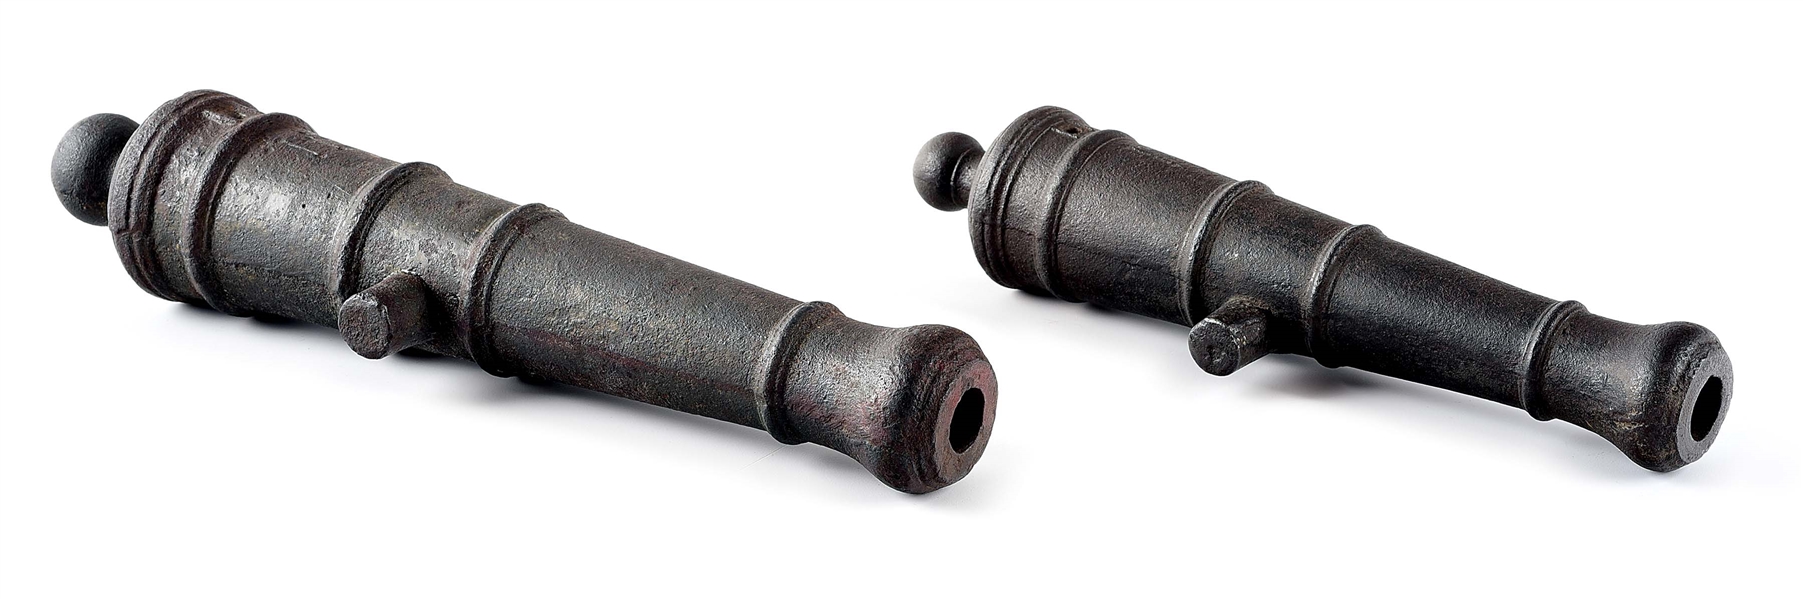 PAIR OF SWISS IRON SIGNAL CANNON TUBES, MARKED FOR THE HALLEFORS MILL.